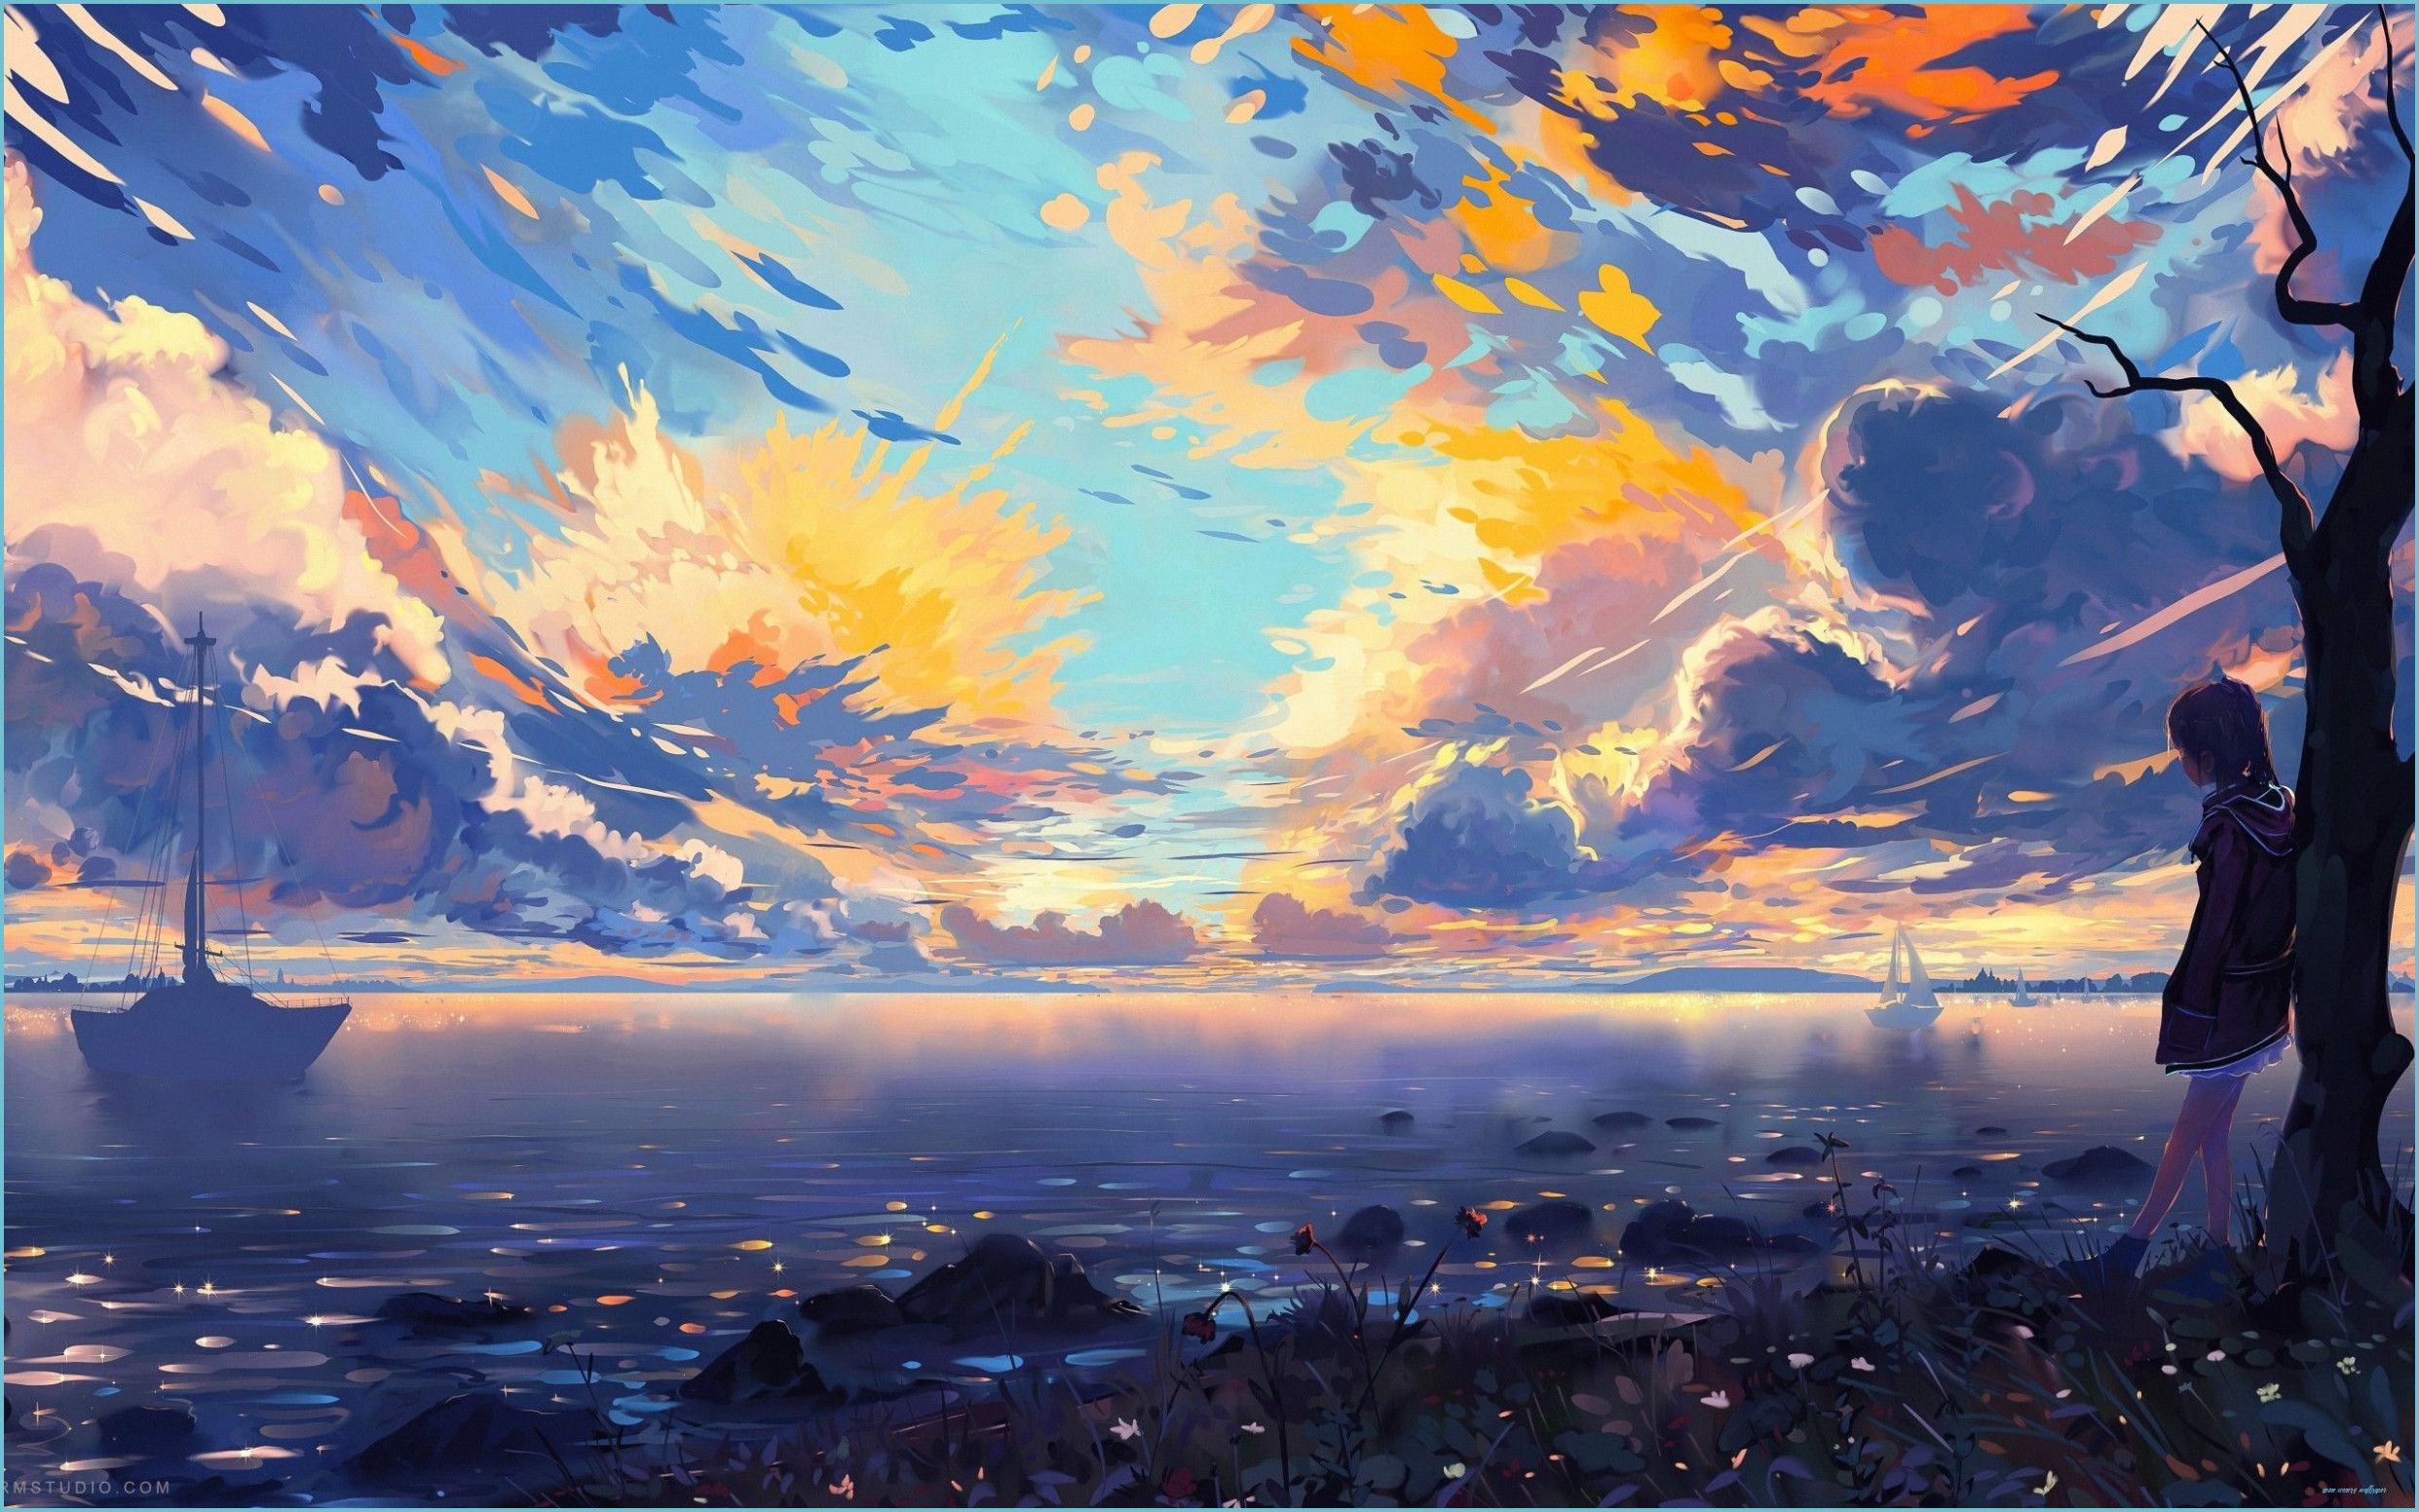 Colorful Anime Scenery Wallpaper Free Colorful Anime Scenery Wallpaper